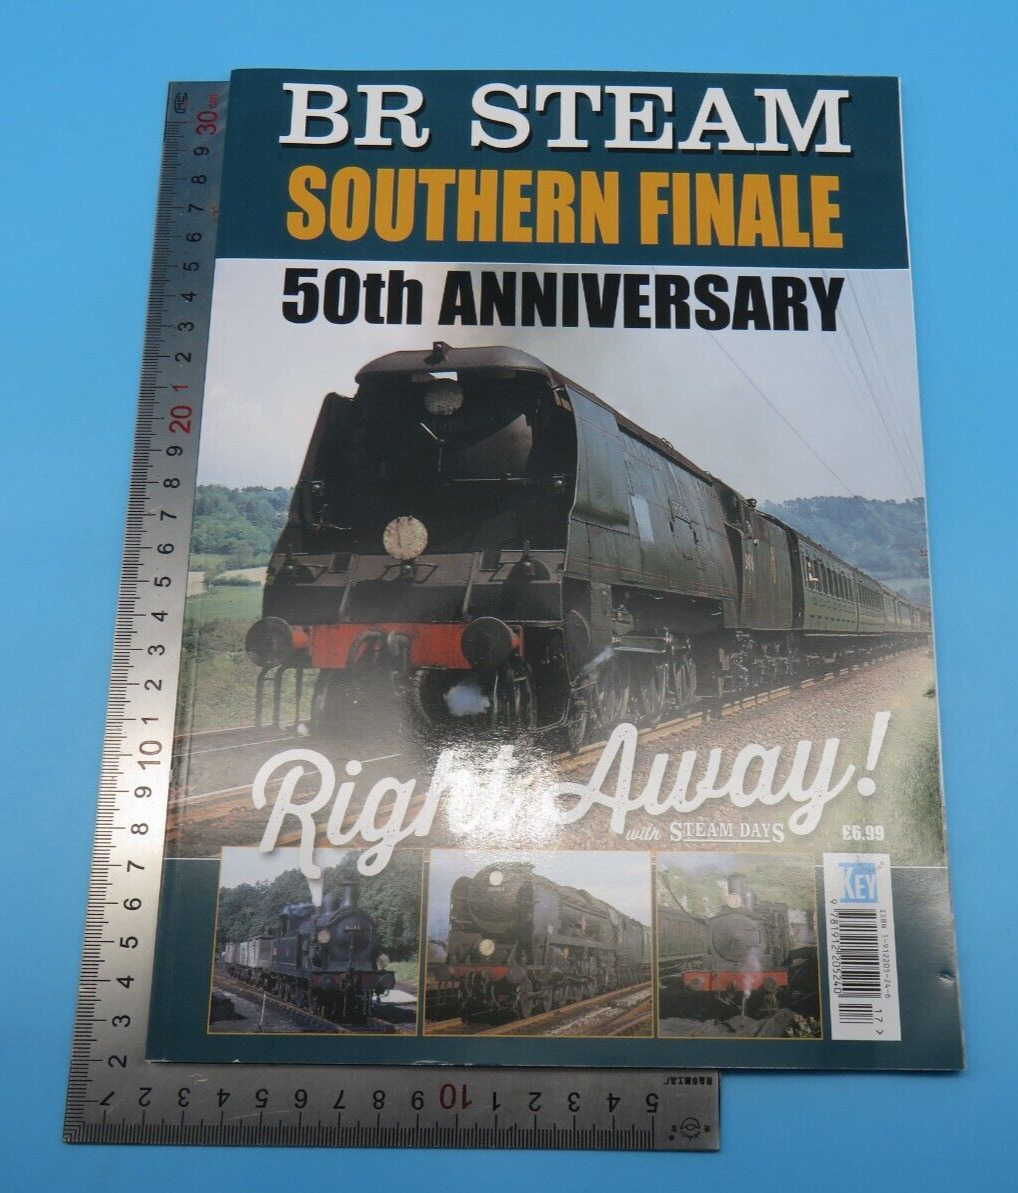 BR Steam Southern Finale 50th Anniversary Right Away With Steam Days Paperback